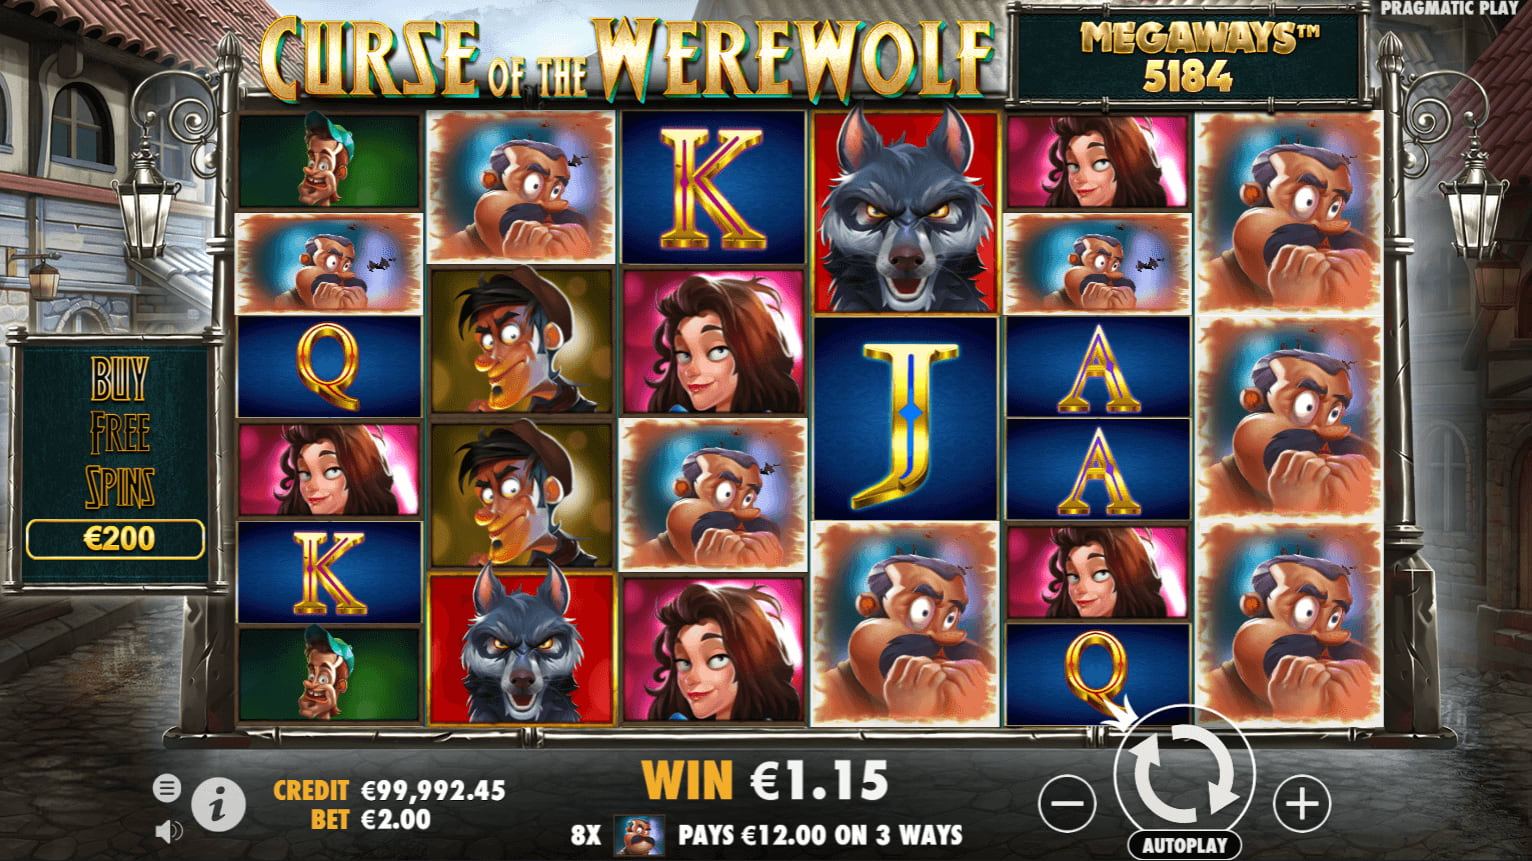 Curse of the Werewolf Megaways slot apk download for android  1.0.0 screenshot 4